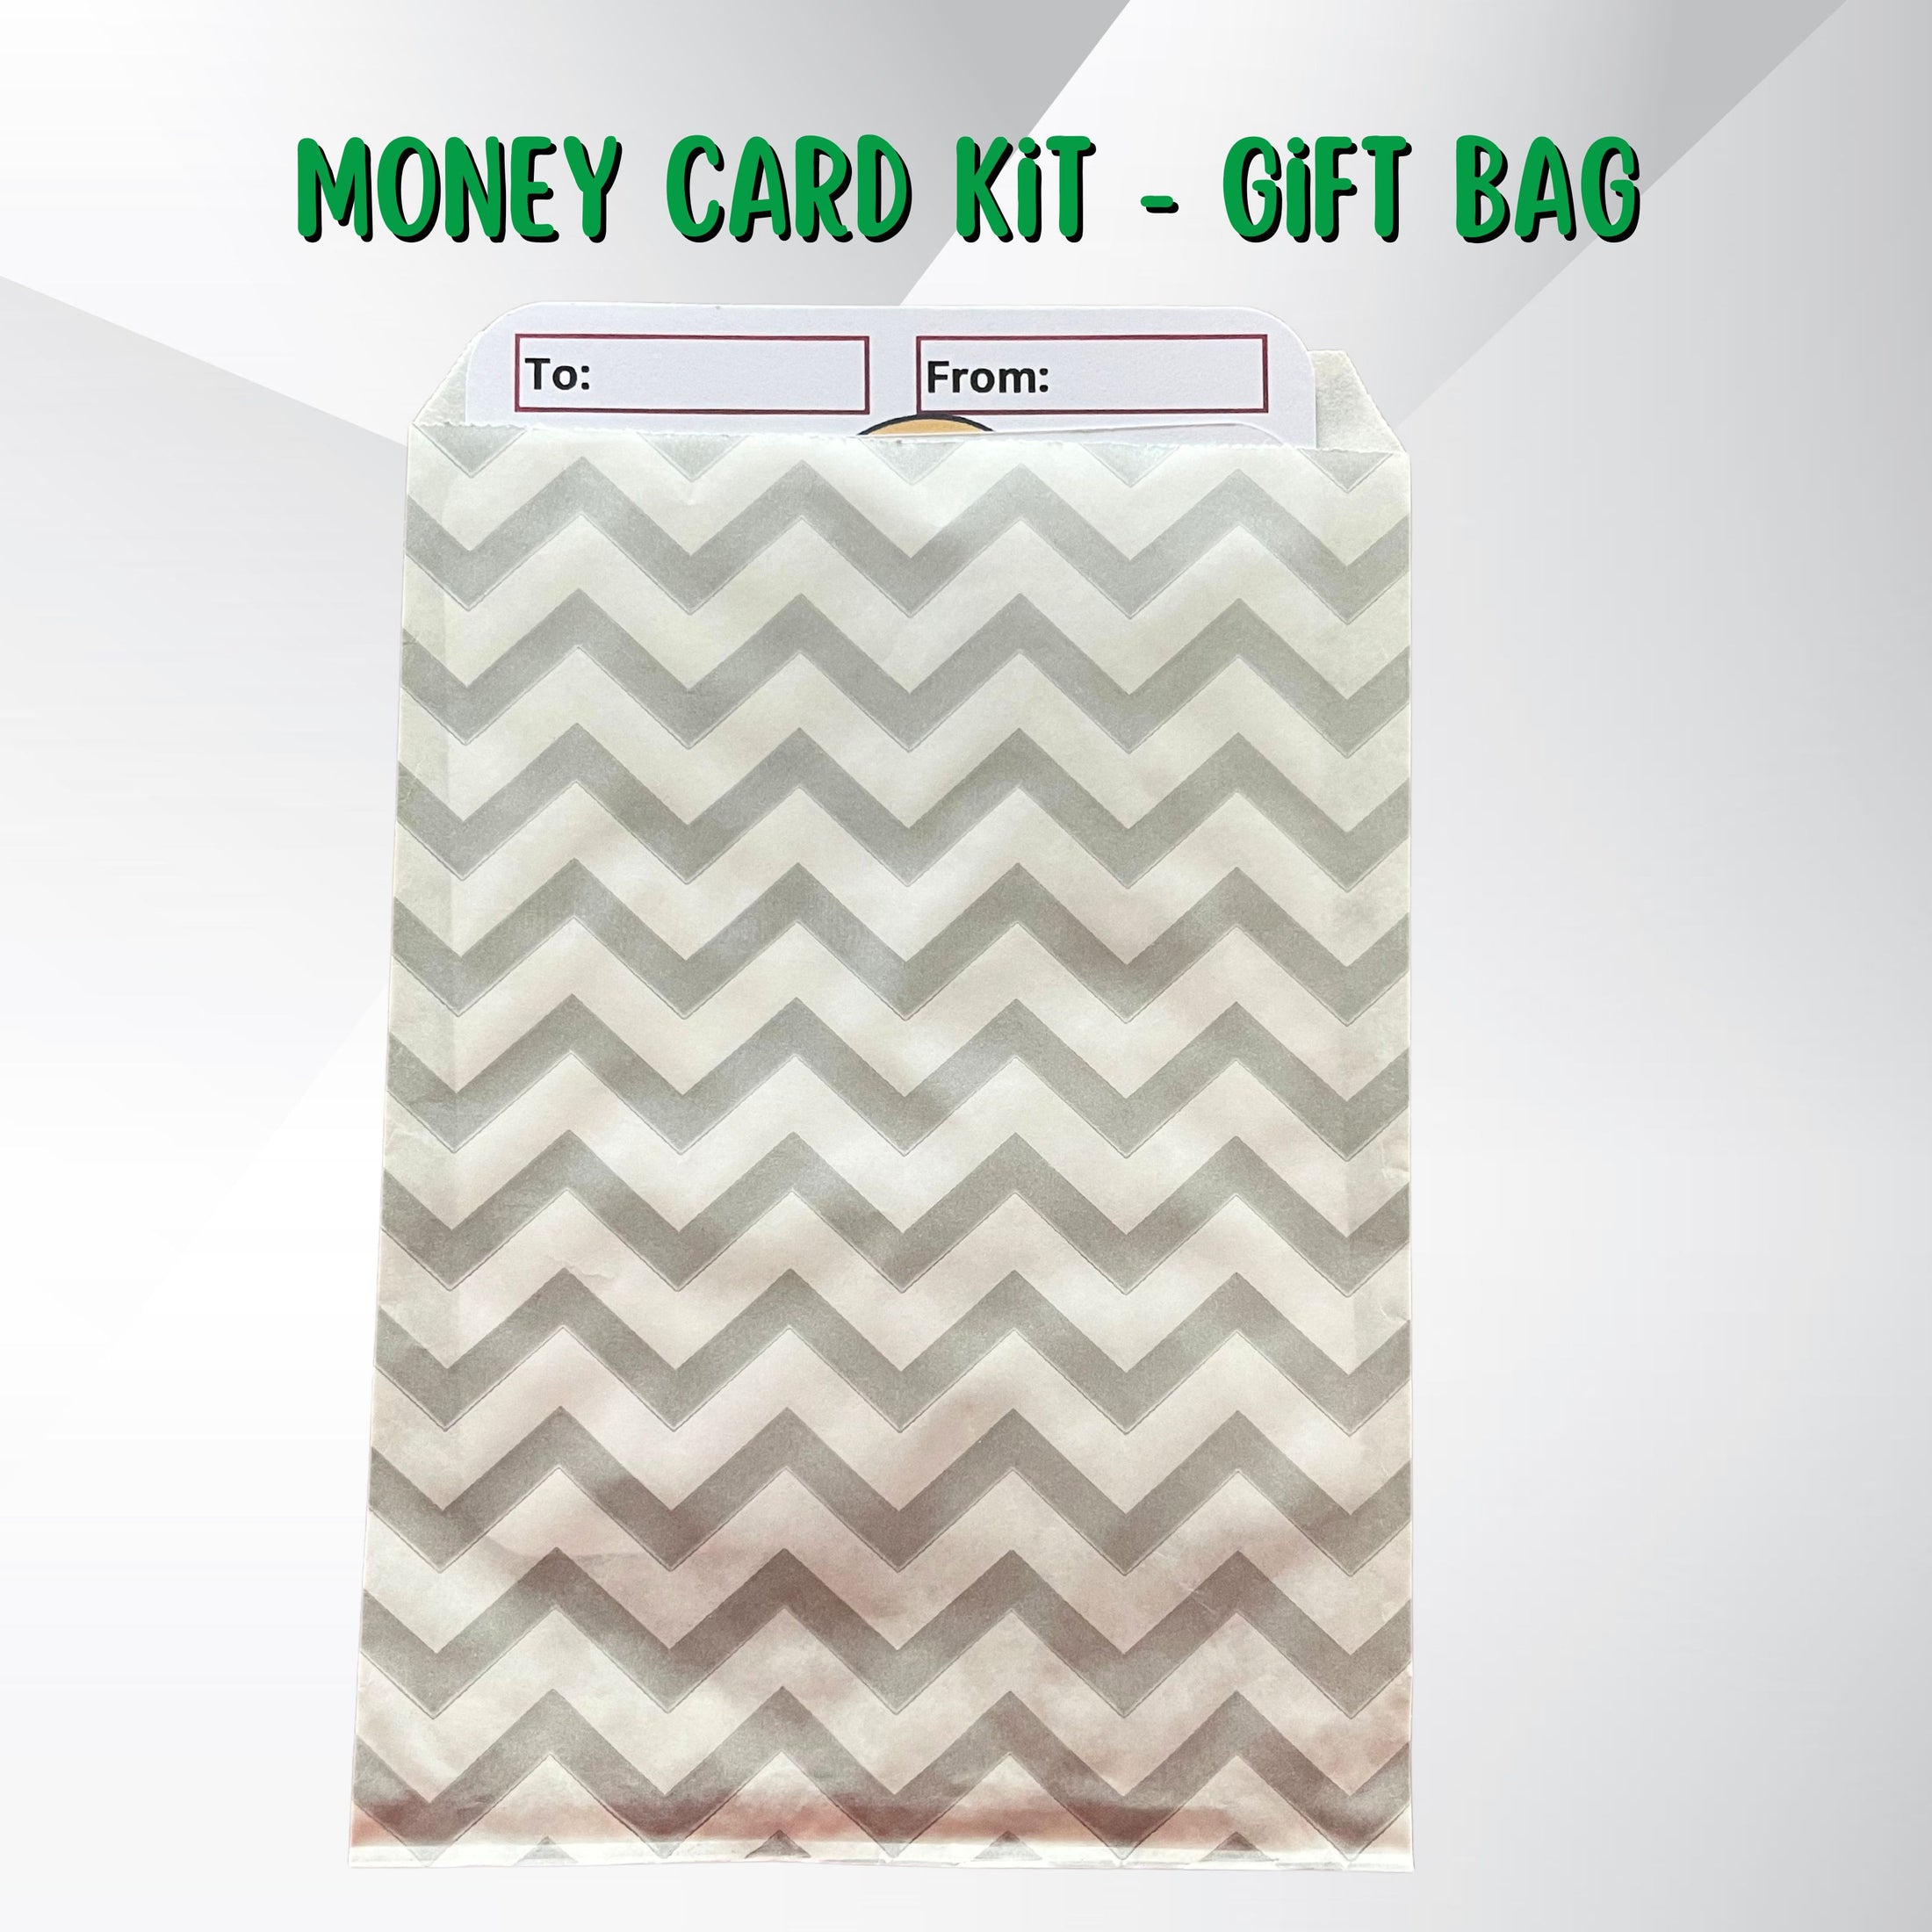 This image shows a money card inside the included gift bag.